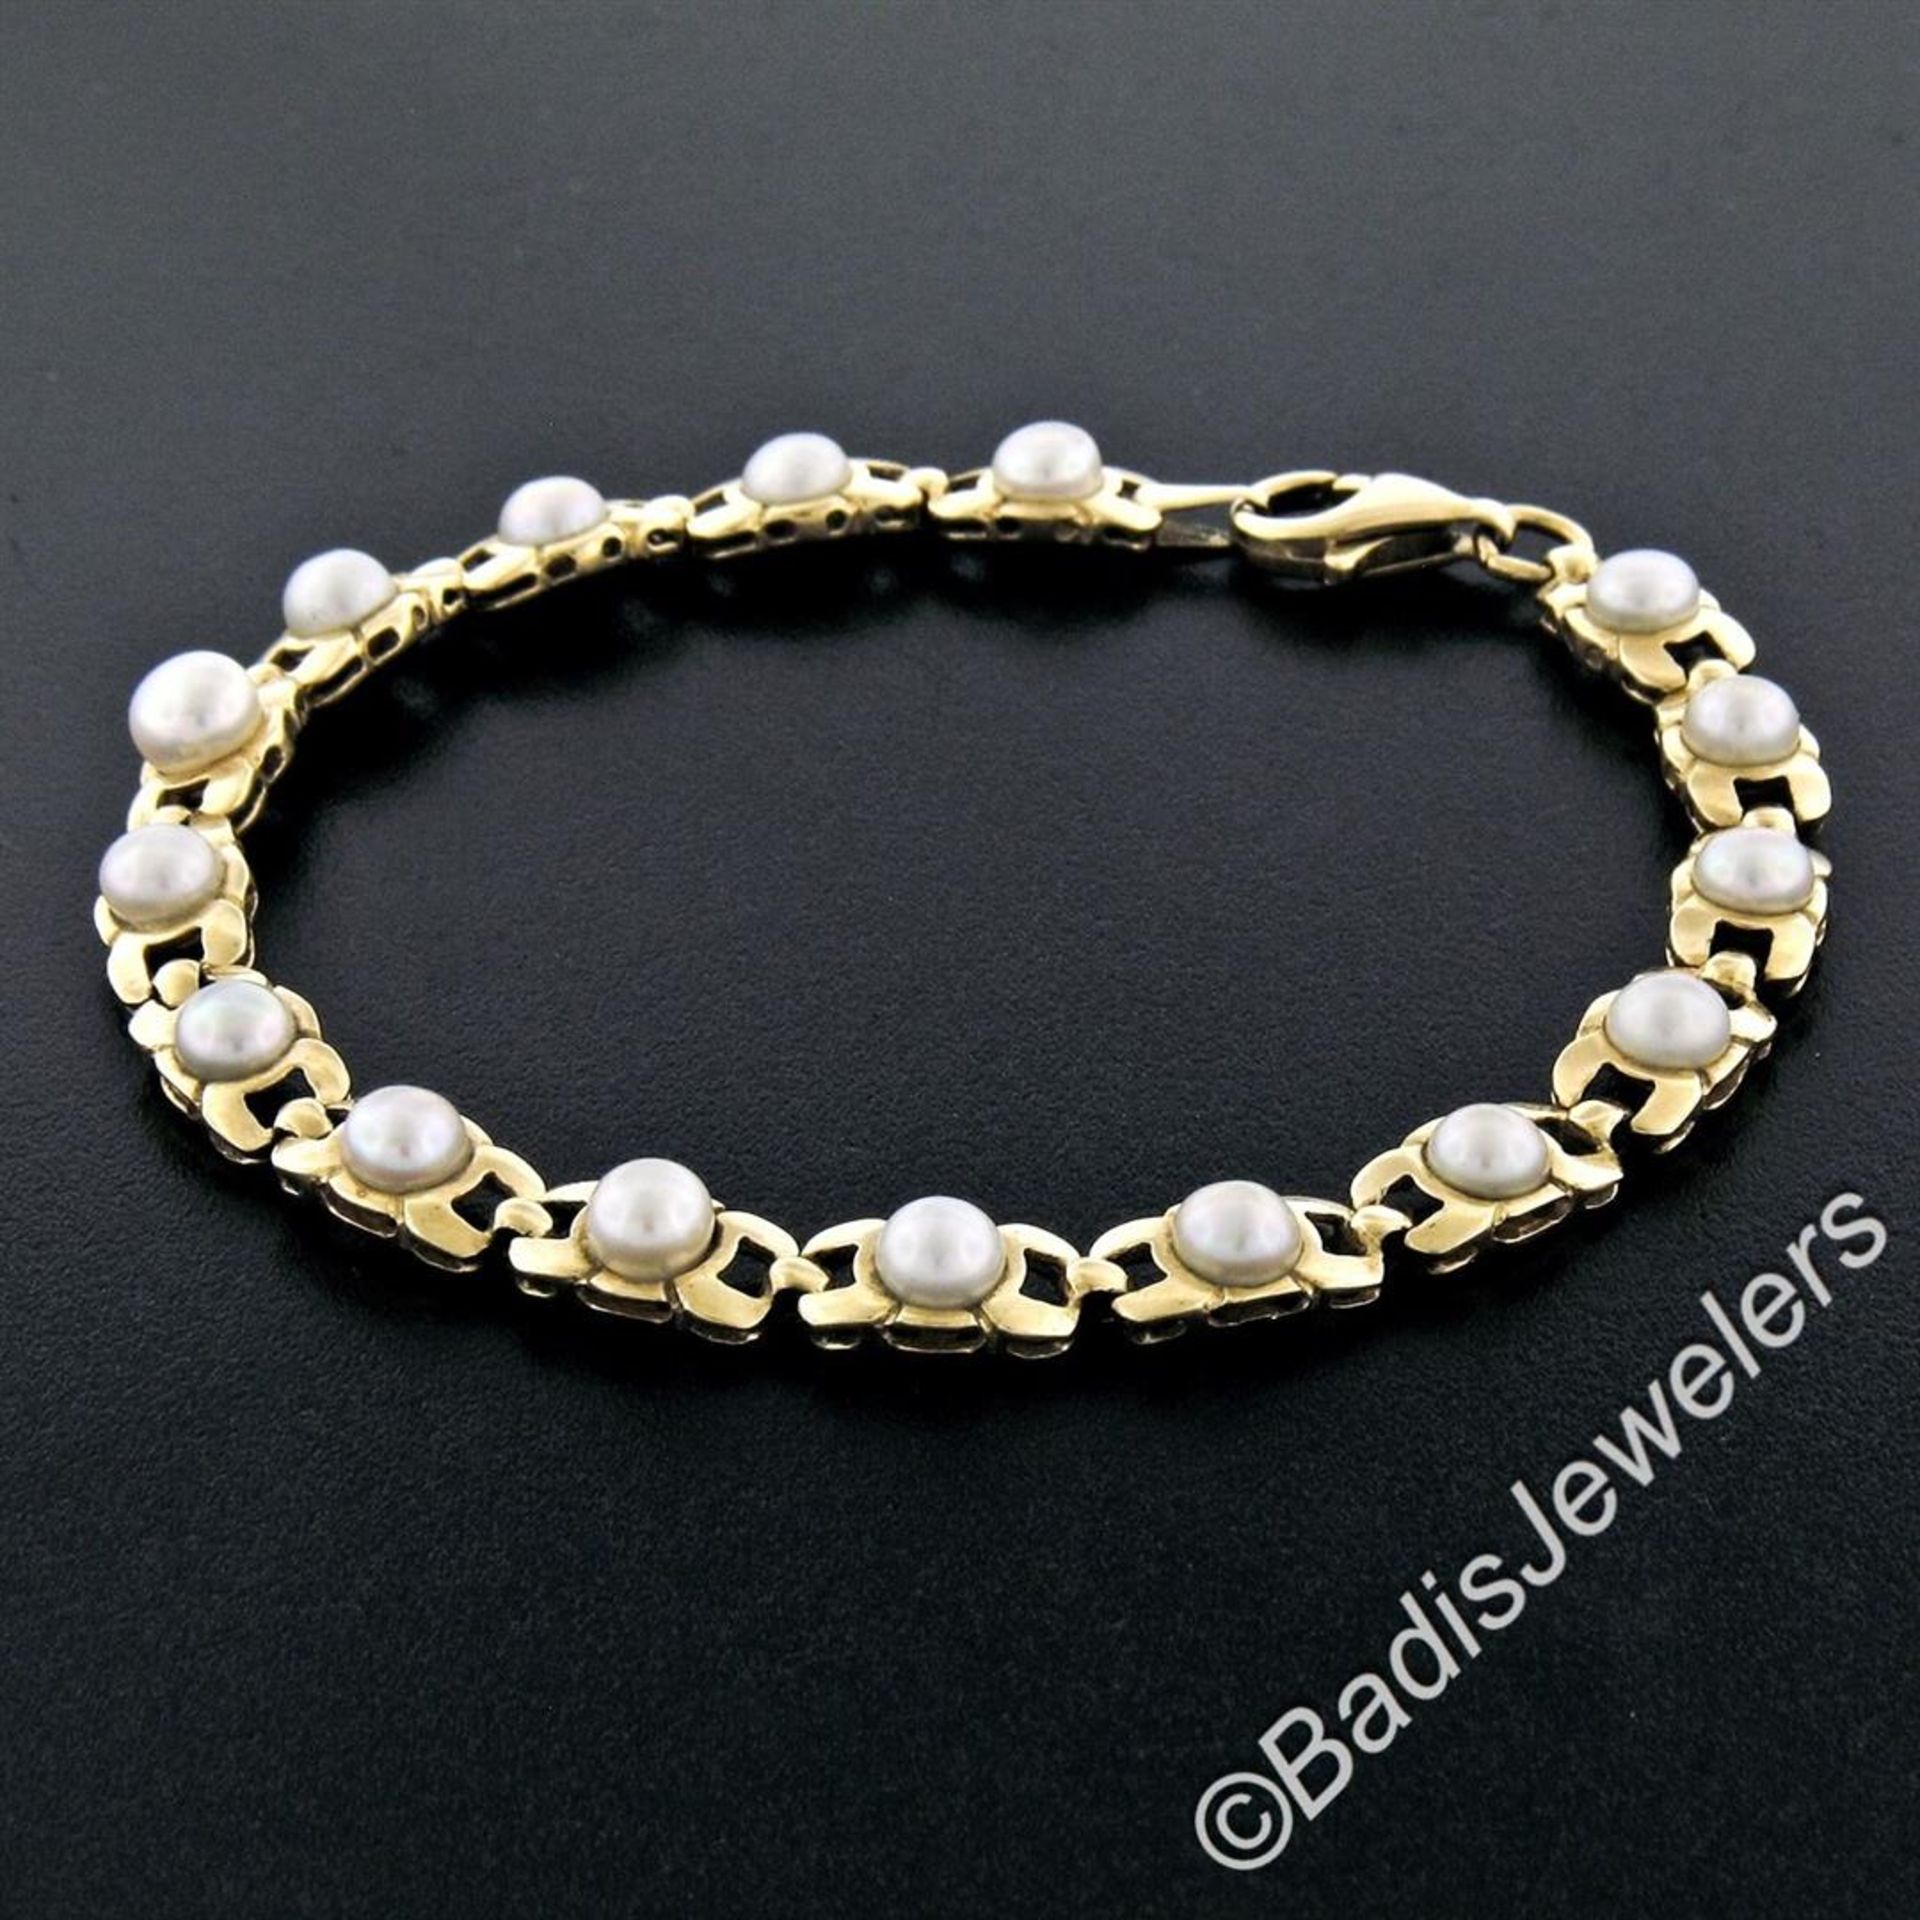 Vintage 14kt Yellow Gold Open Link and Natural Freshwater Pearl Tennis Bracelet - Image 3 of 7